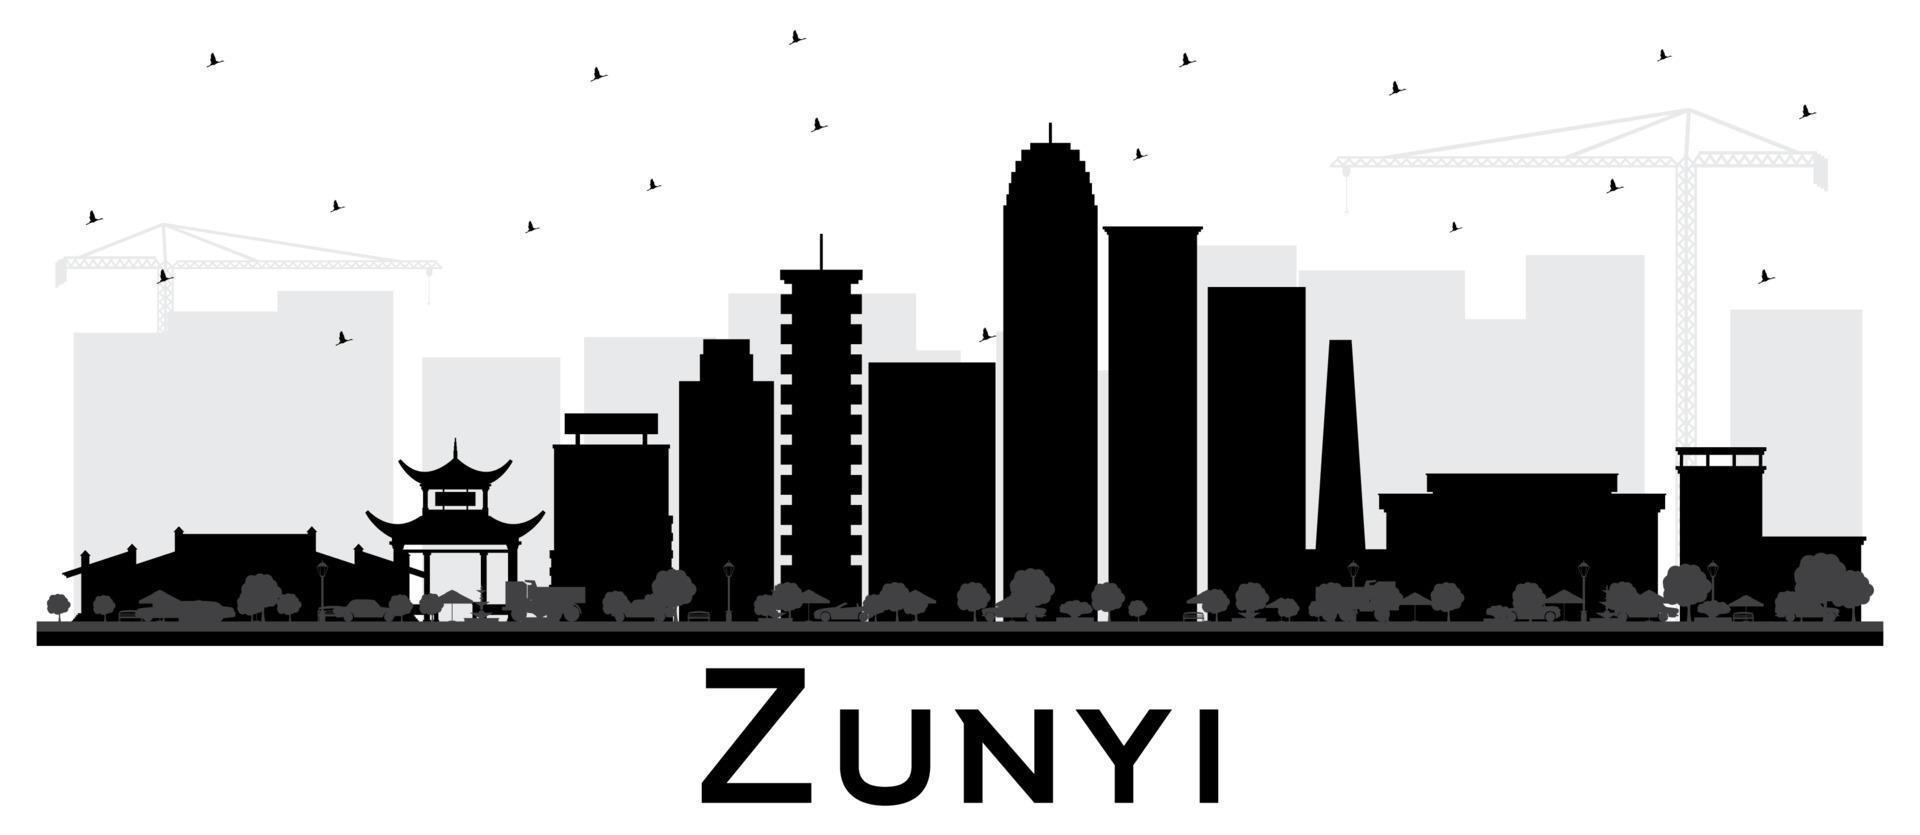 Zunyi China City Skyline Silhouette with Black Buildings Isolated on White. vector